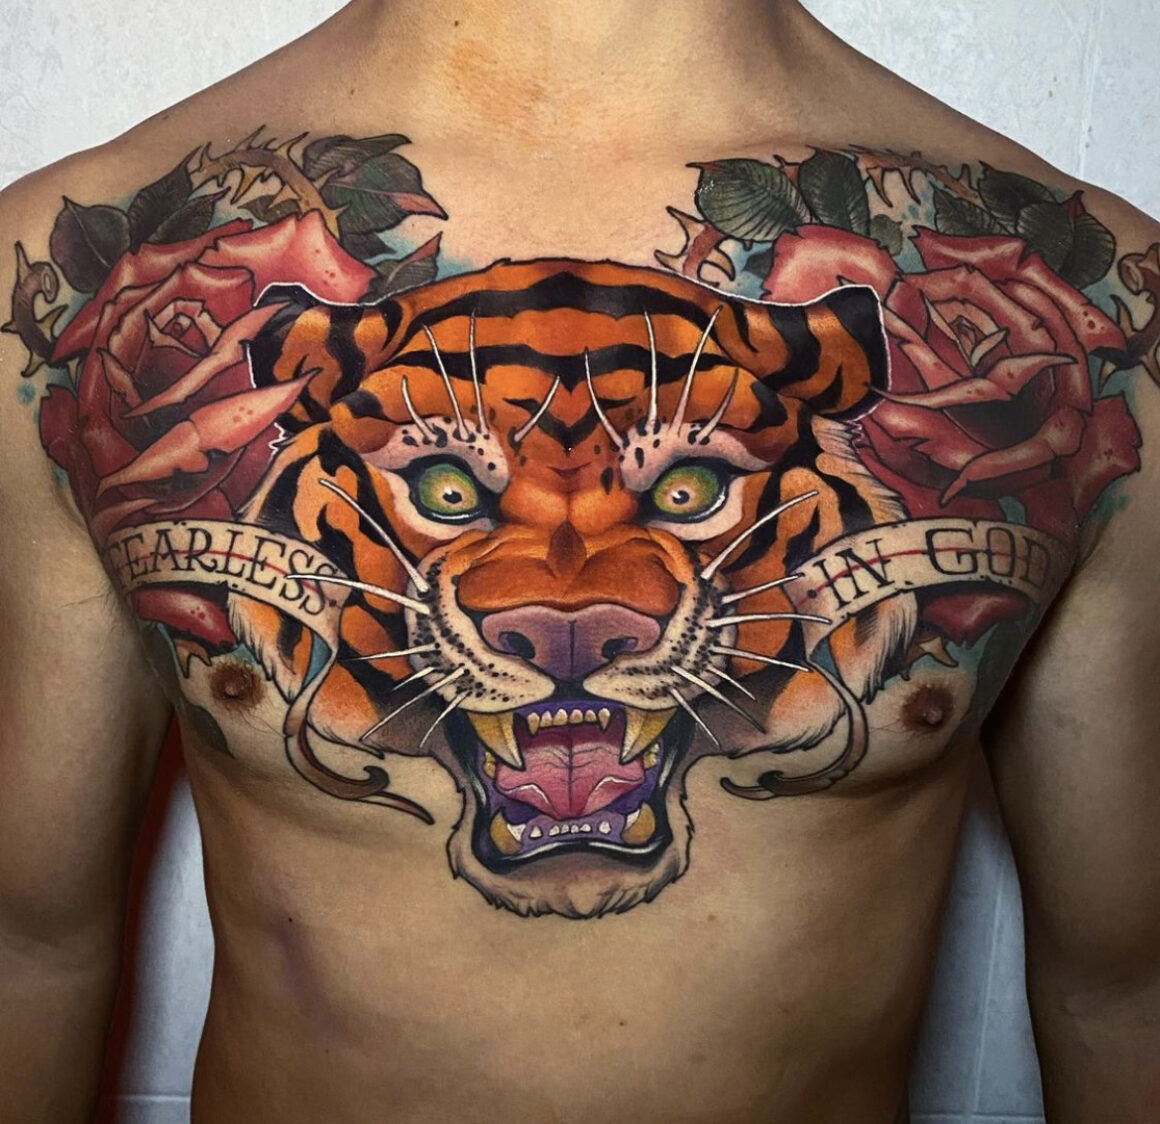 Tattoo by Victor Chil, @victor_chil